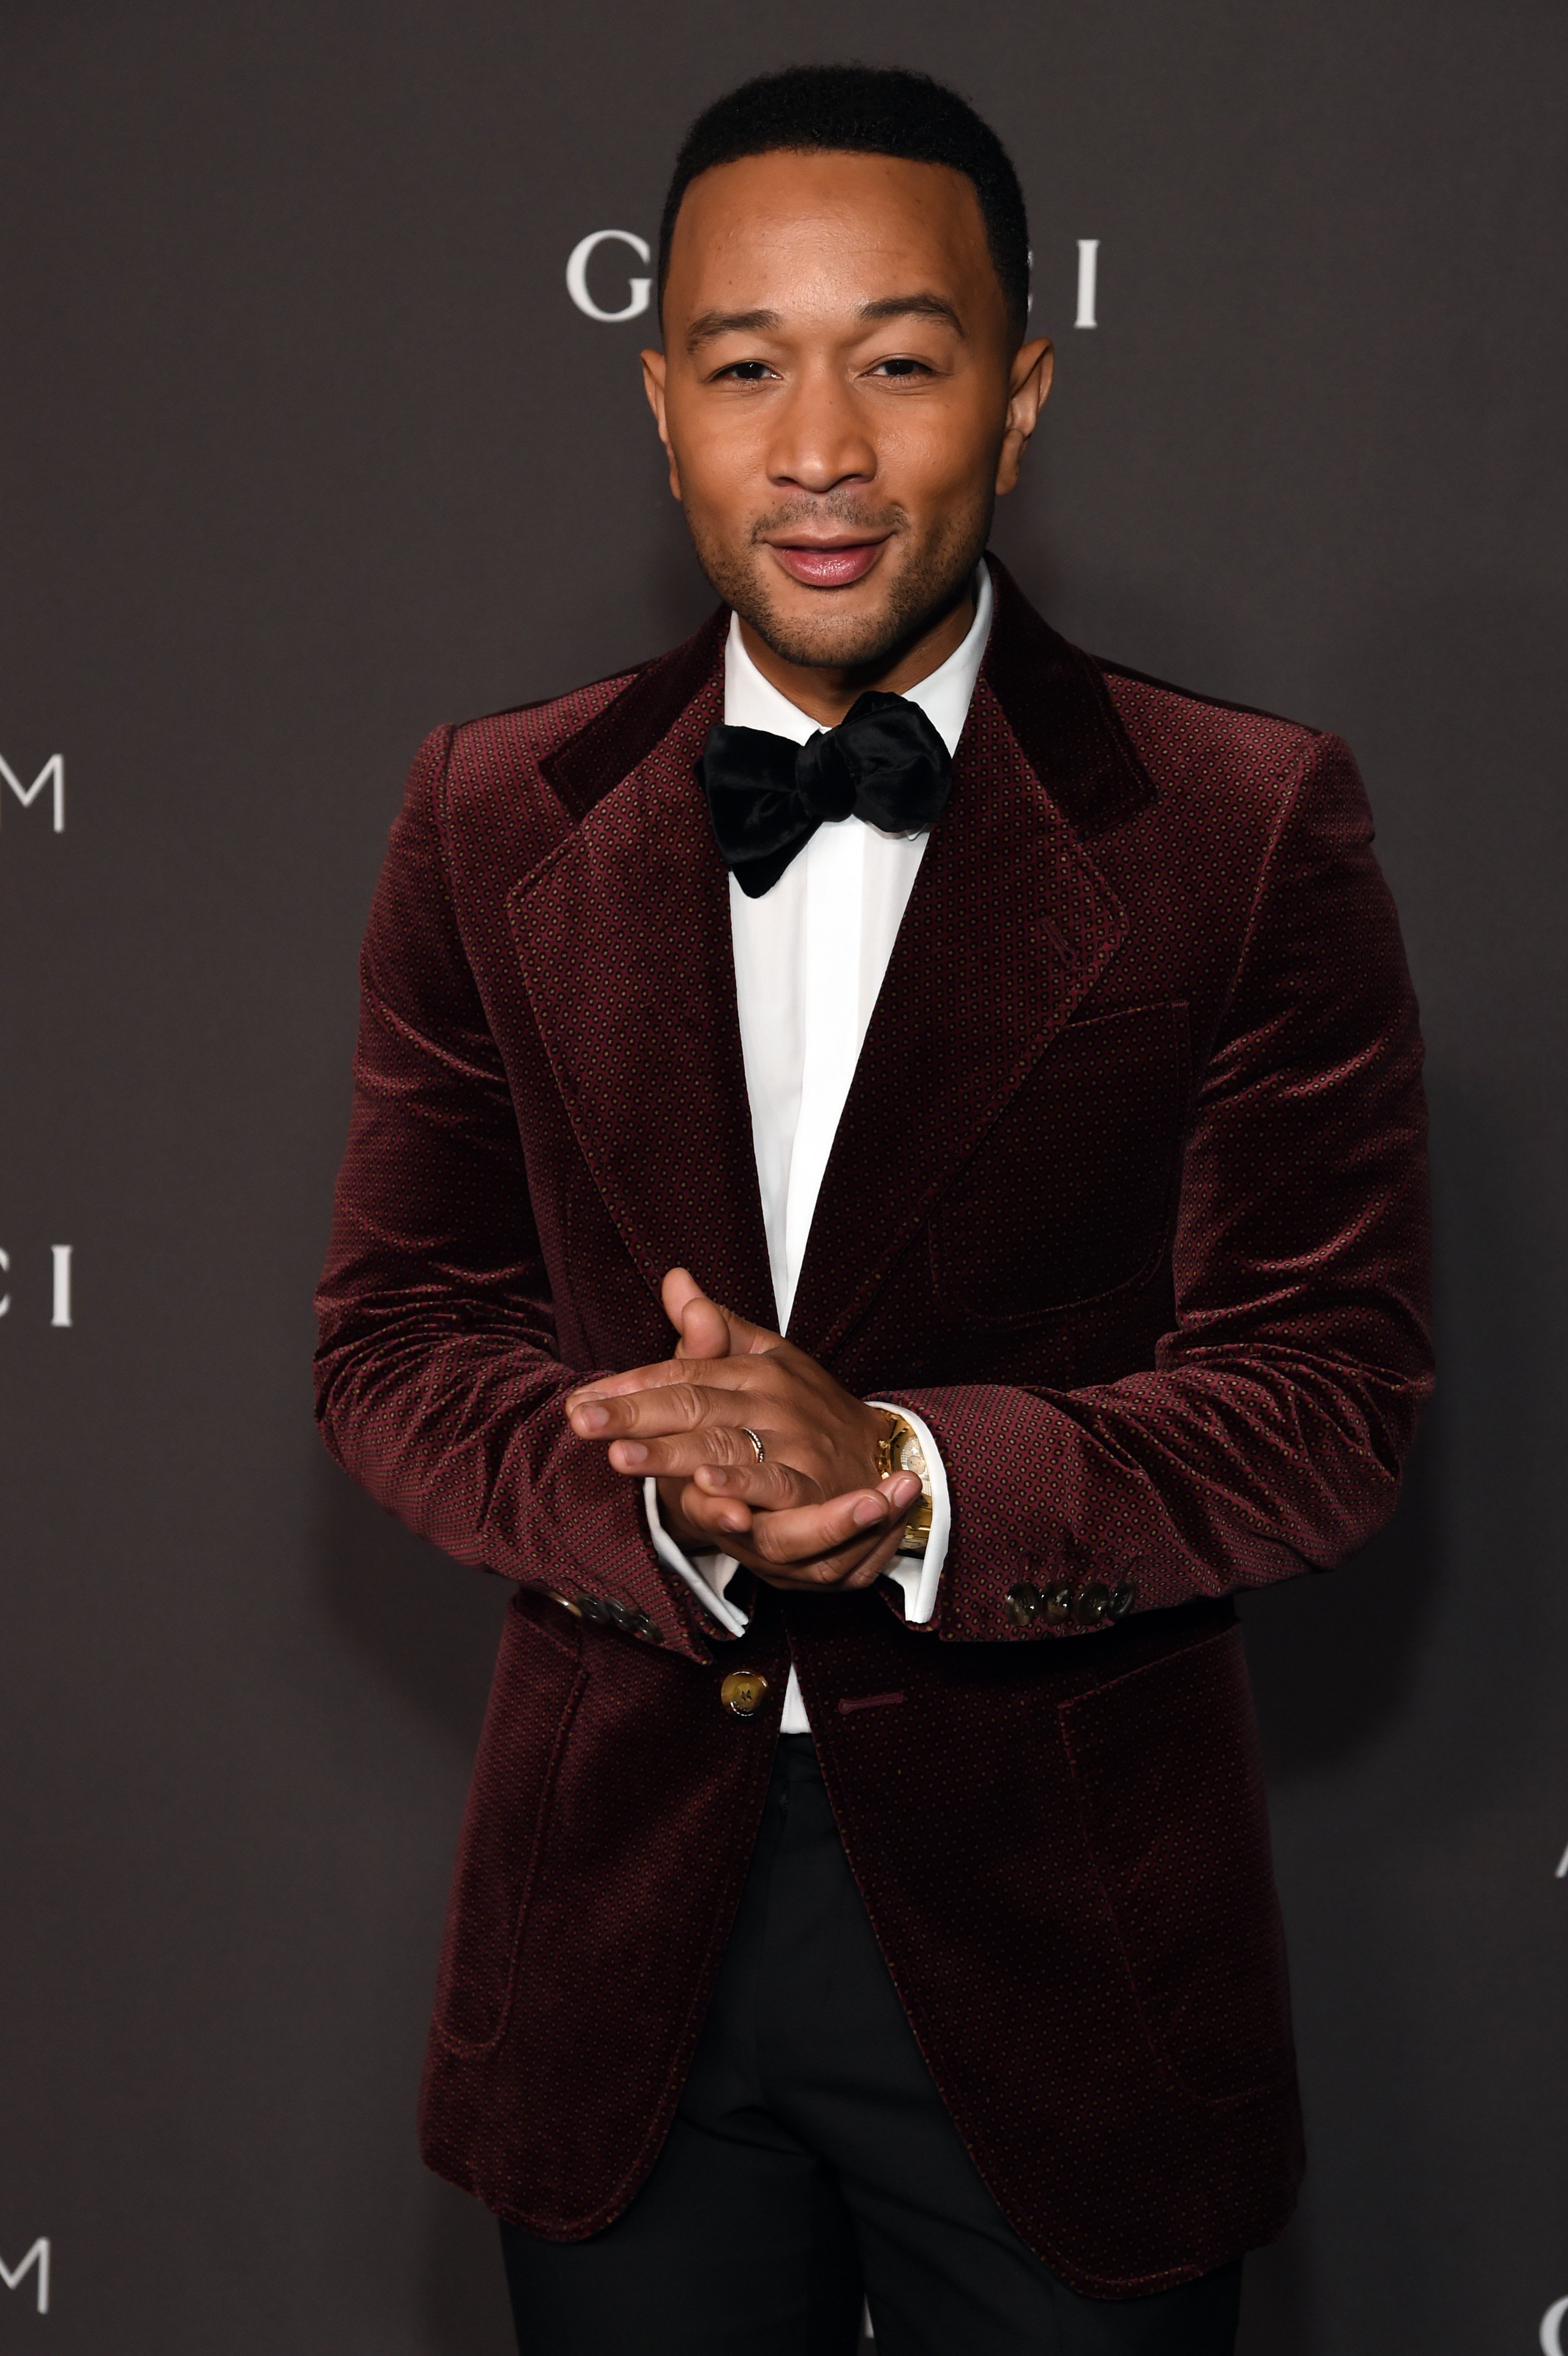 John Legend attends the 2019 LACMA Art + Film Gala  on November 02, 2019, in Los Angeles, California. | Source: Getty Images.